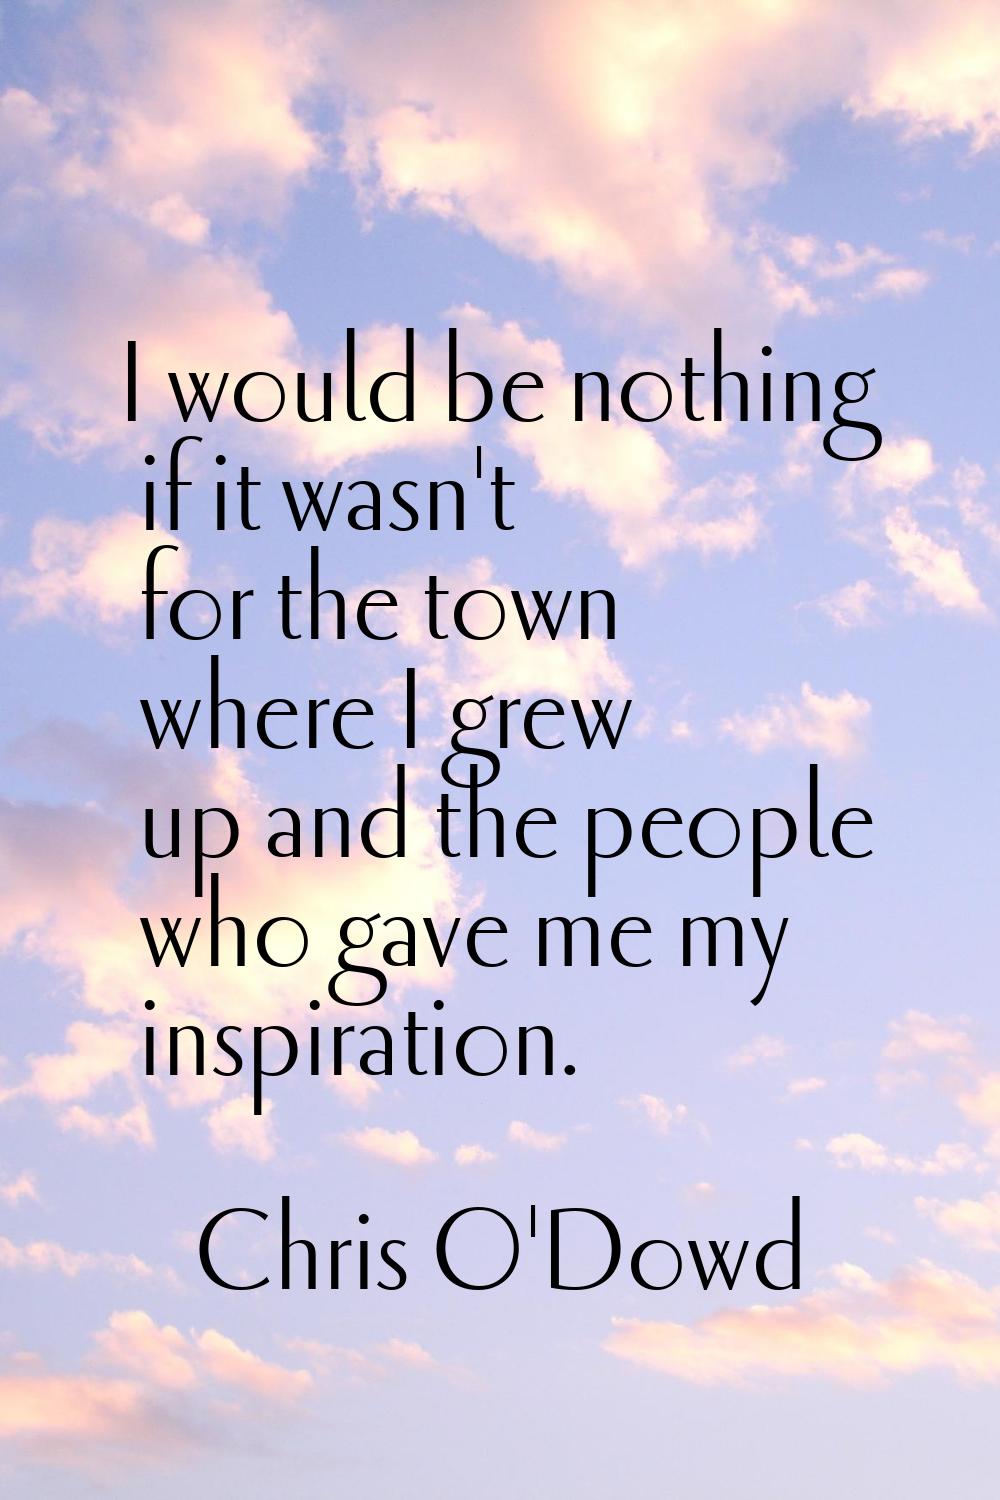 I would be nothing if it wasn't for the town where I grew up and the people who gave me my inspirat